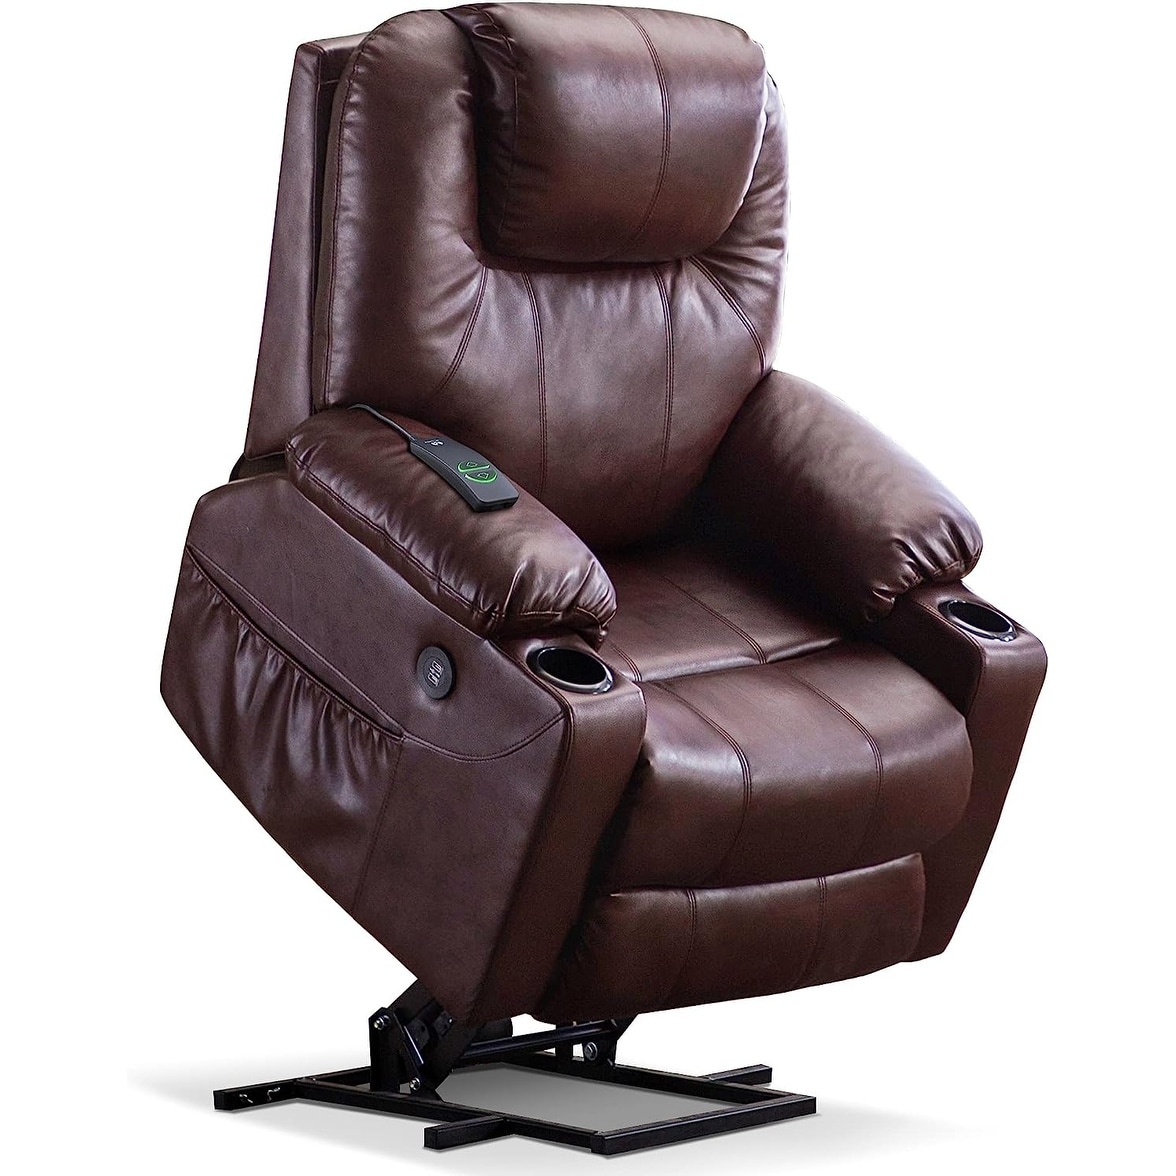 https://ak1.ostkcdn.com/images/products/is/images/direct/a76e6b5bf289f1560bf35737998c93ed95a635e2/Mcombo-Electric-Power-Lift-Recliner-Chair-with-Massage-Heat%2C-Faux-Leather.jpg